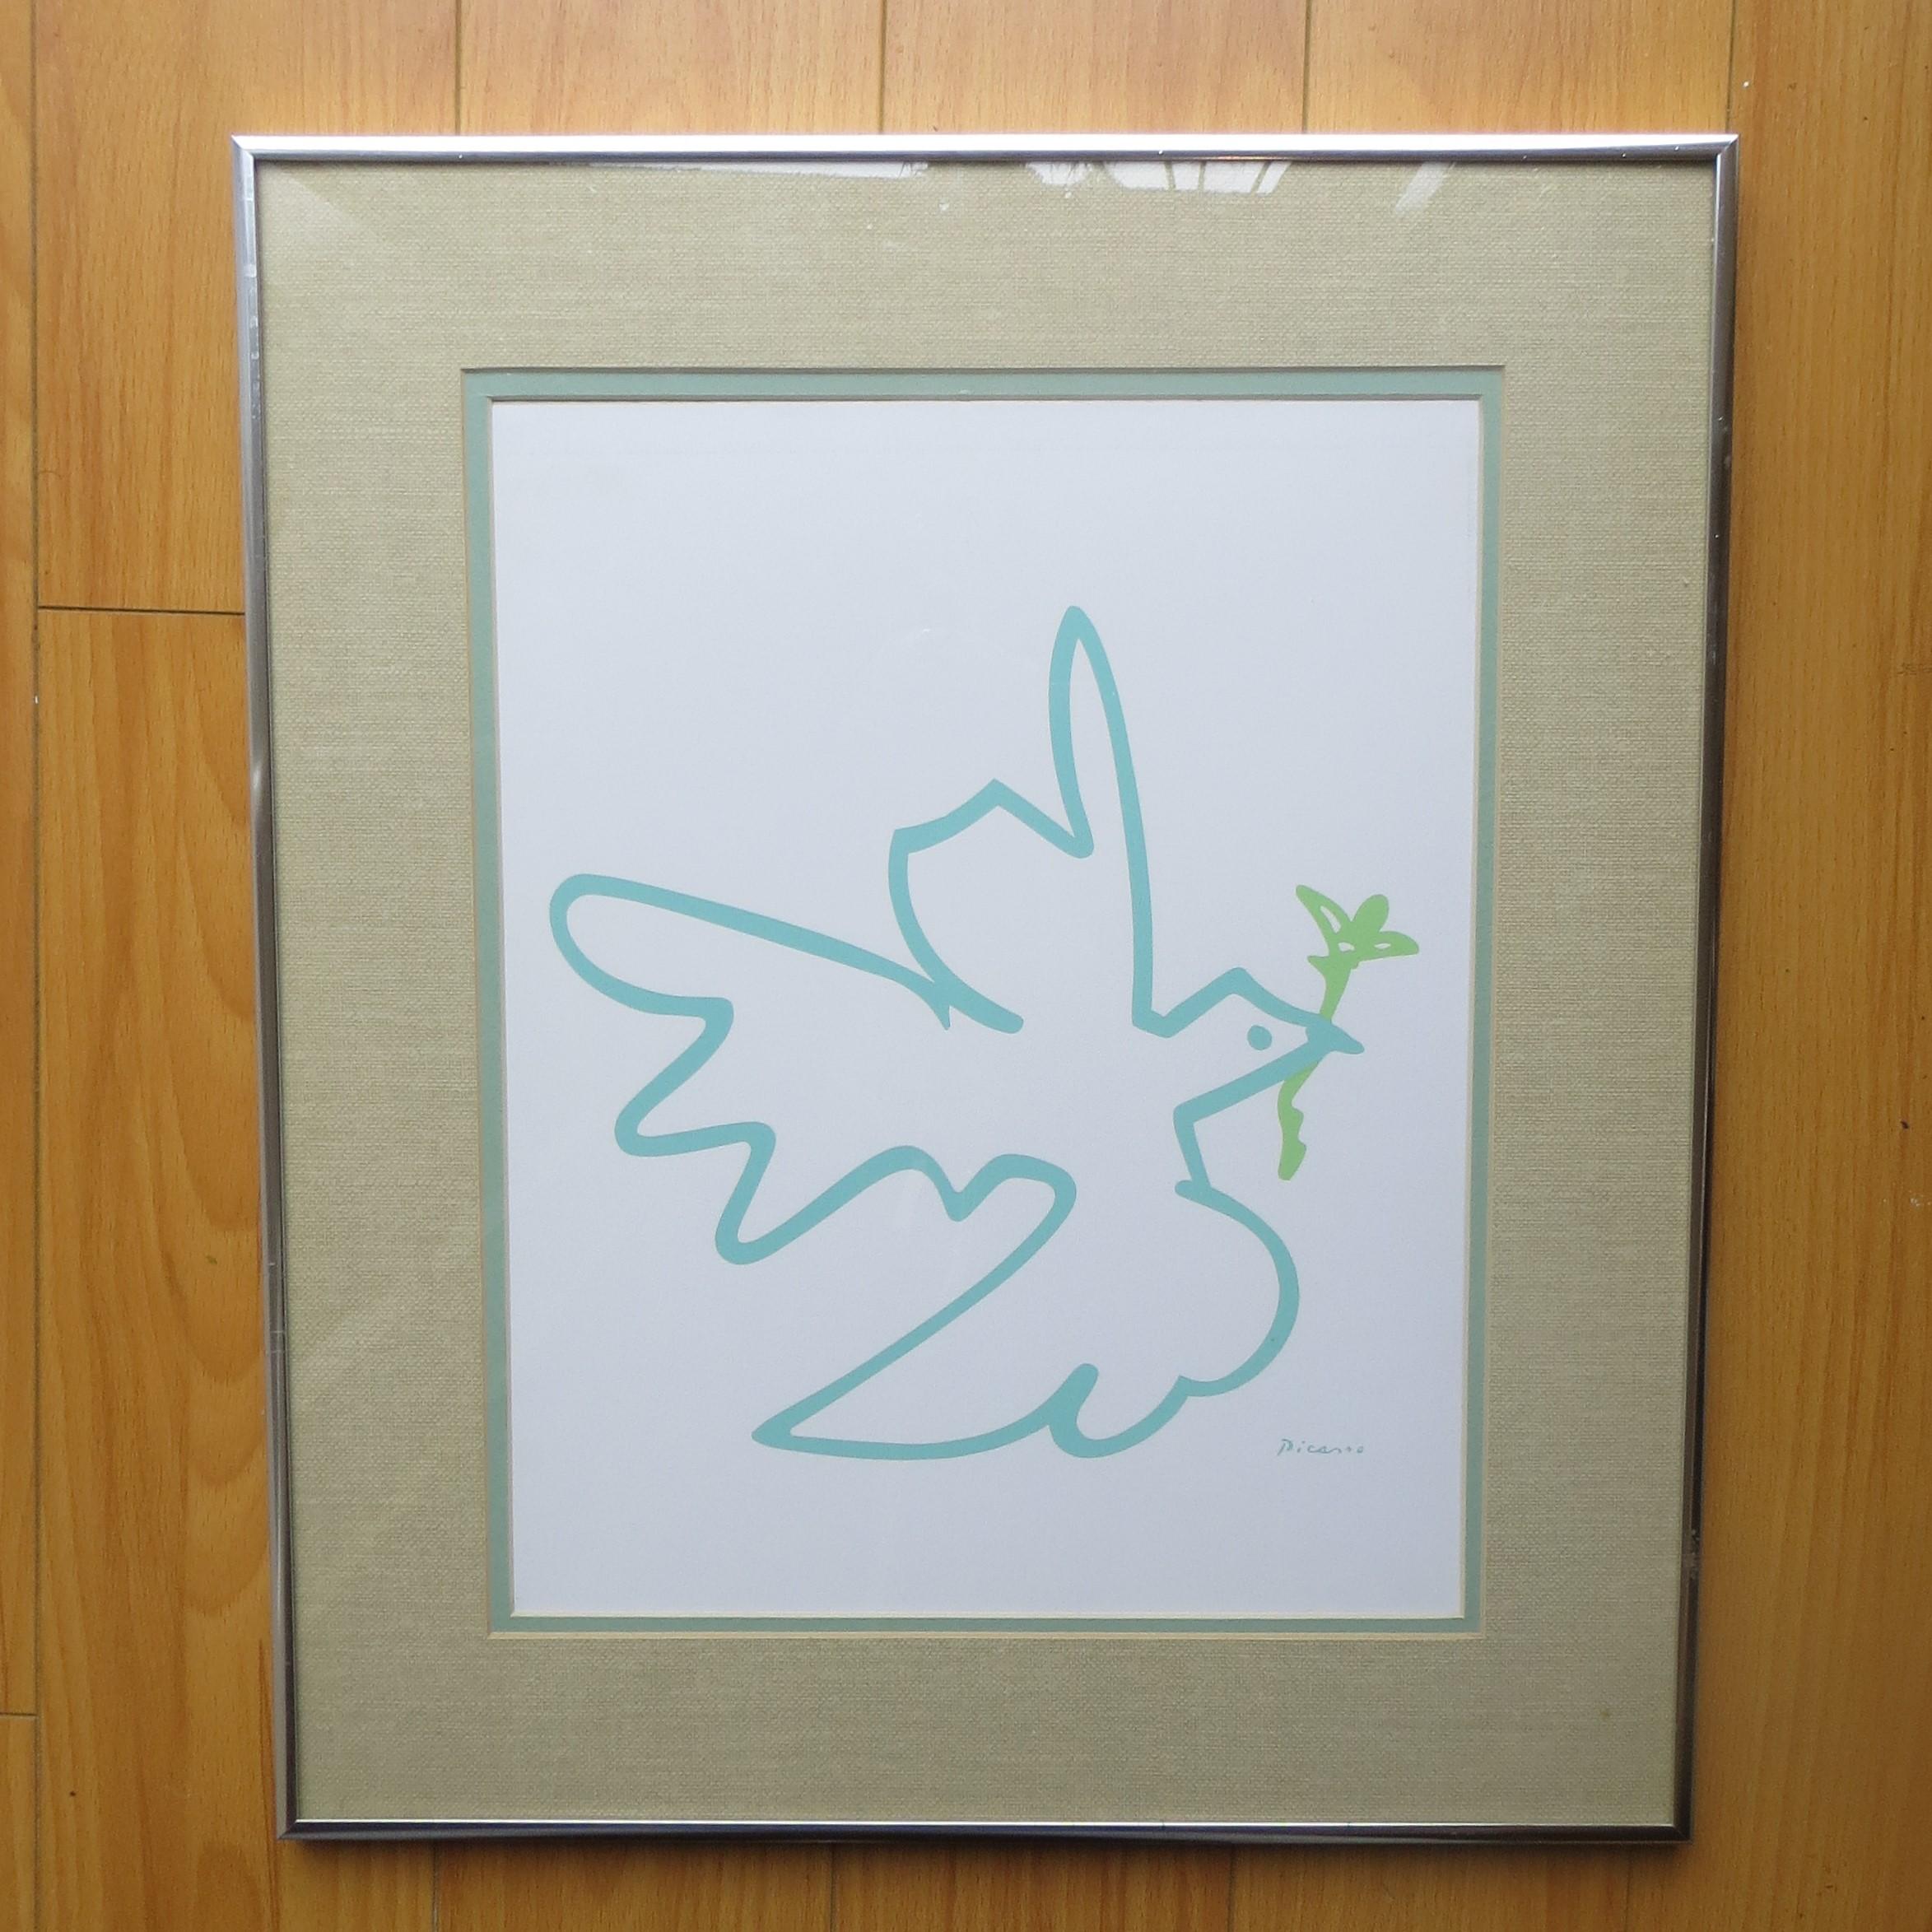 
After PABLO PICASSO (1881-1973)
Peace Dove 1
1961. Signed in the plate
Edition Succession Picasso, Paris (posthumous reproductive edition)
Editions de la Paix
 Pablo Picasso (1881- 1973) Spanish painter and sculptor. He is considered one of the